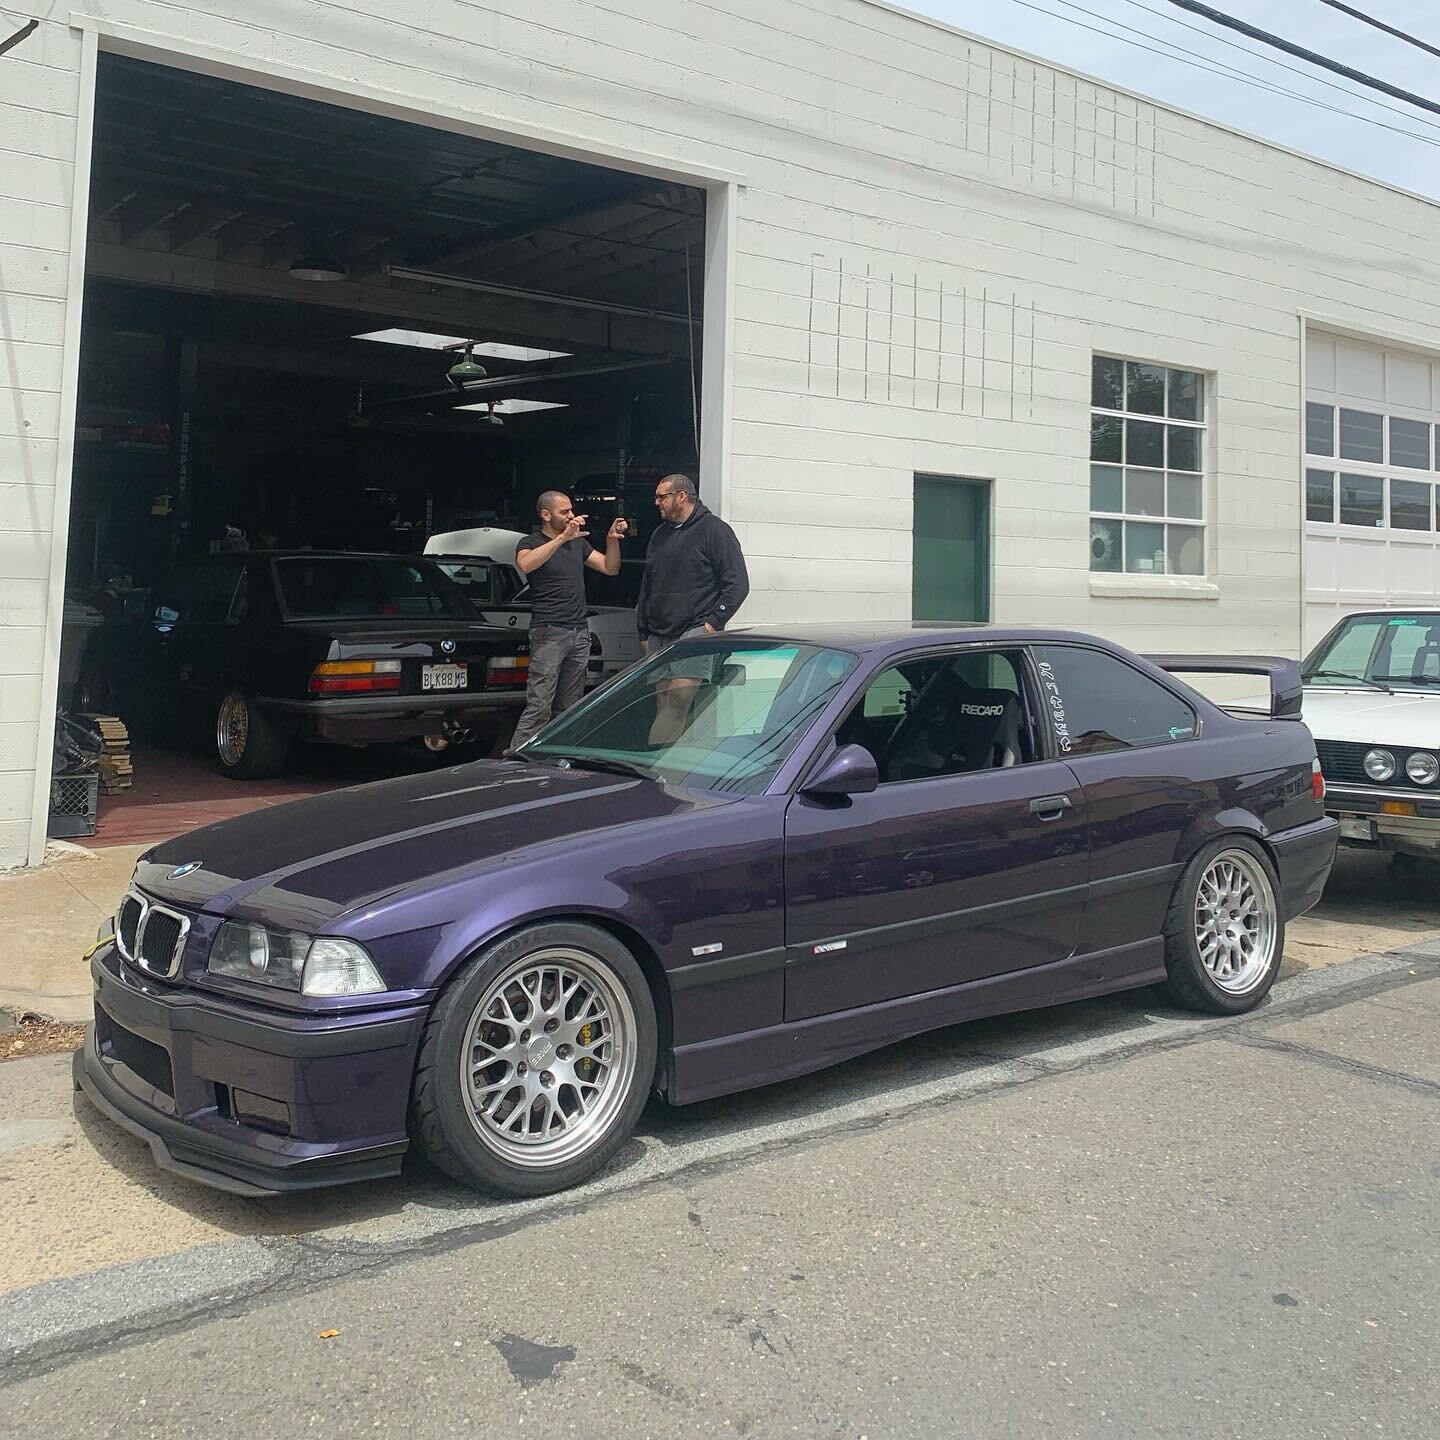 We&rsquo;ve had the pleasure of doing tons of work to get Max&rsquo;s S54 E36 M3 back to its former glory of being a street &amp; track ready driver.

For the most recent visit, the car came in for an OEM S54 5 speed clutch and flywheel in exchange f